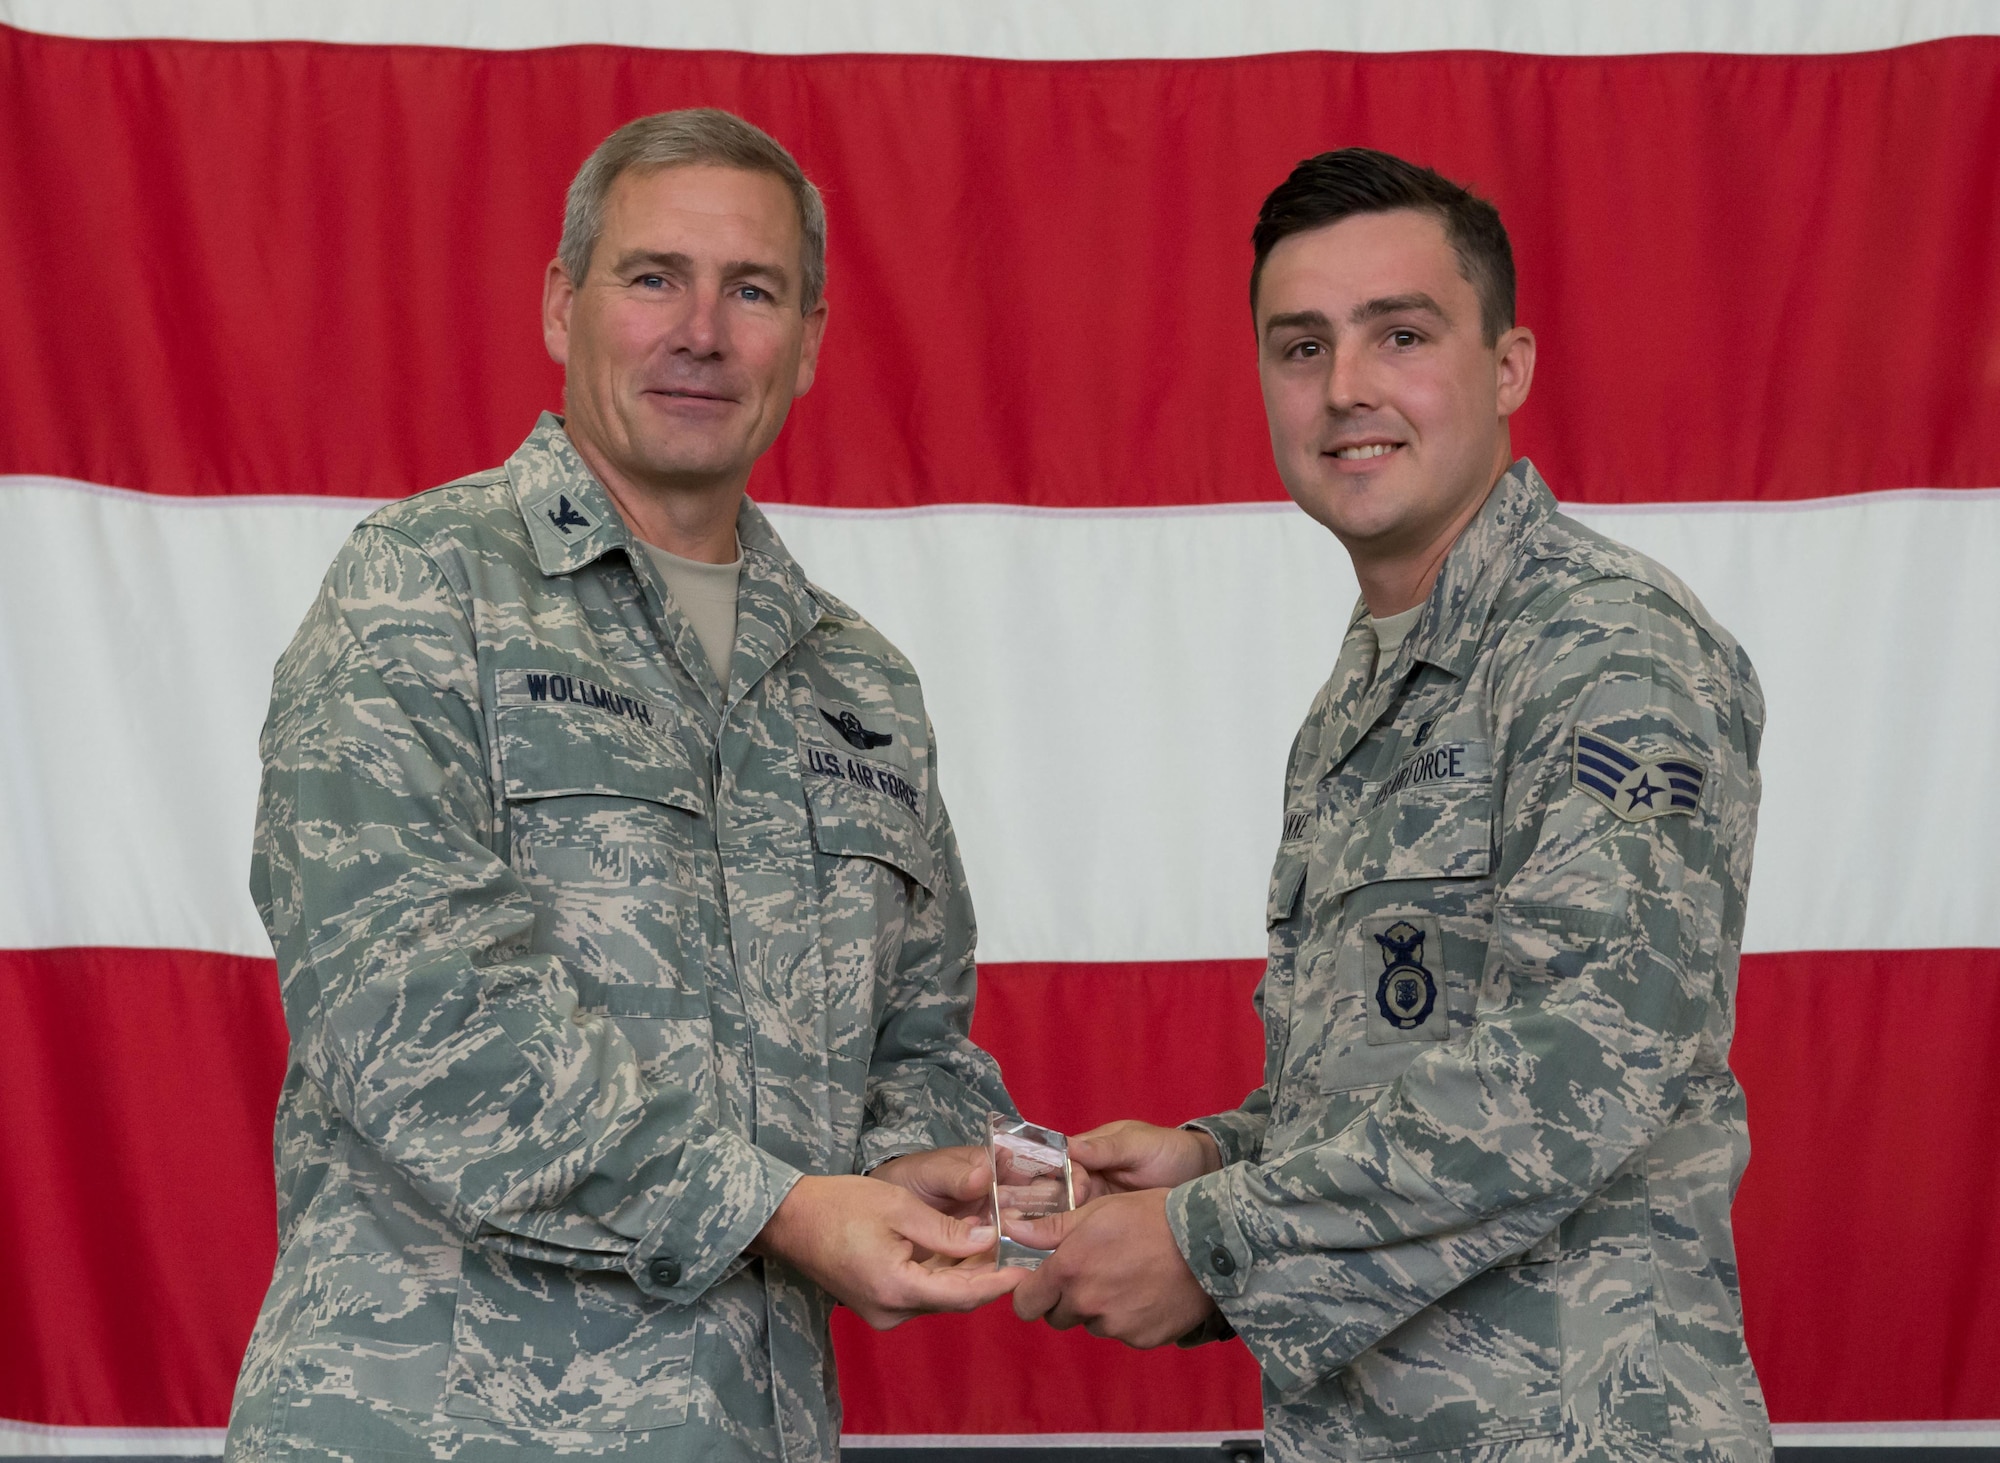 Senior Airman Joel Bakke, 934th Security Forces Squadron, receives the Airman of the Quarter award from Col. Tim Wollmuth, 934th Airlift Wing vice commander, Aug. 5. (Air Force Photo/Tech. Sgt. Amber E.N. Jacobs)